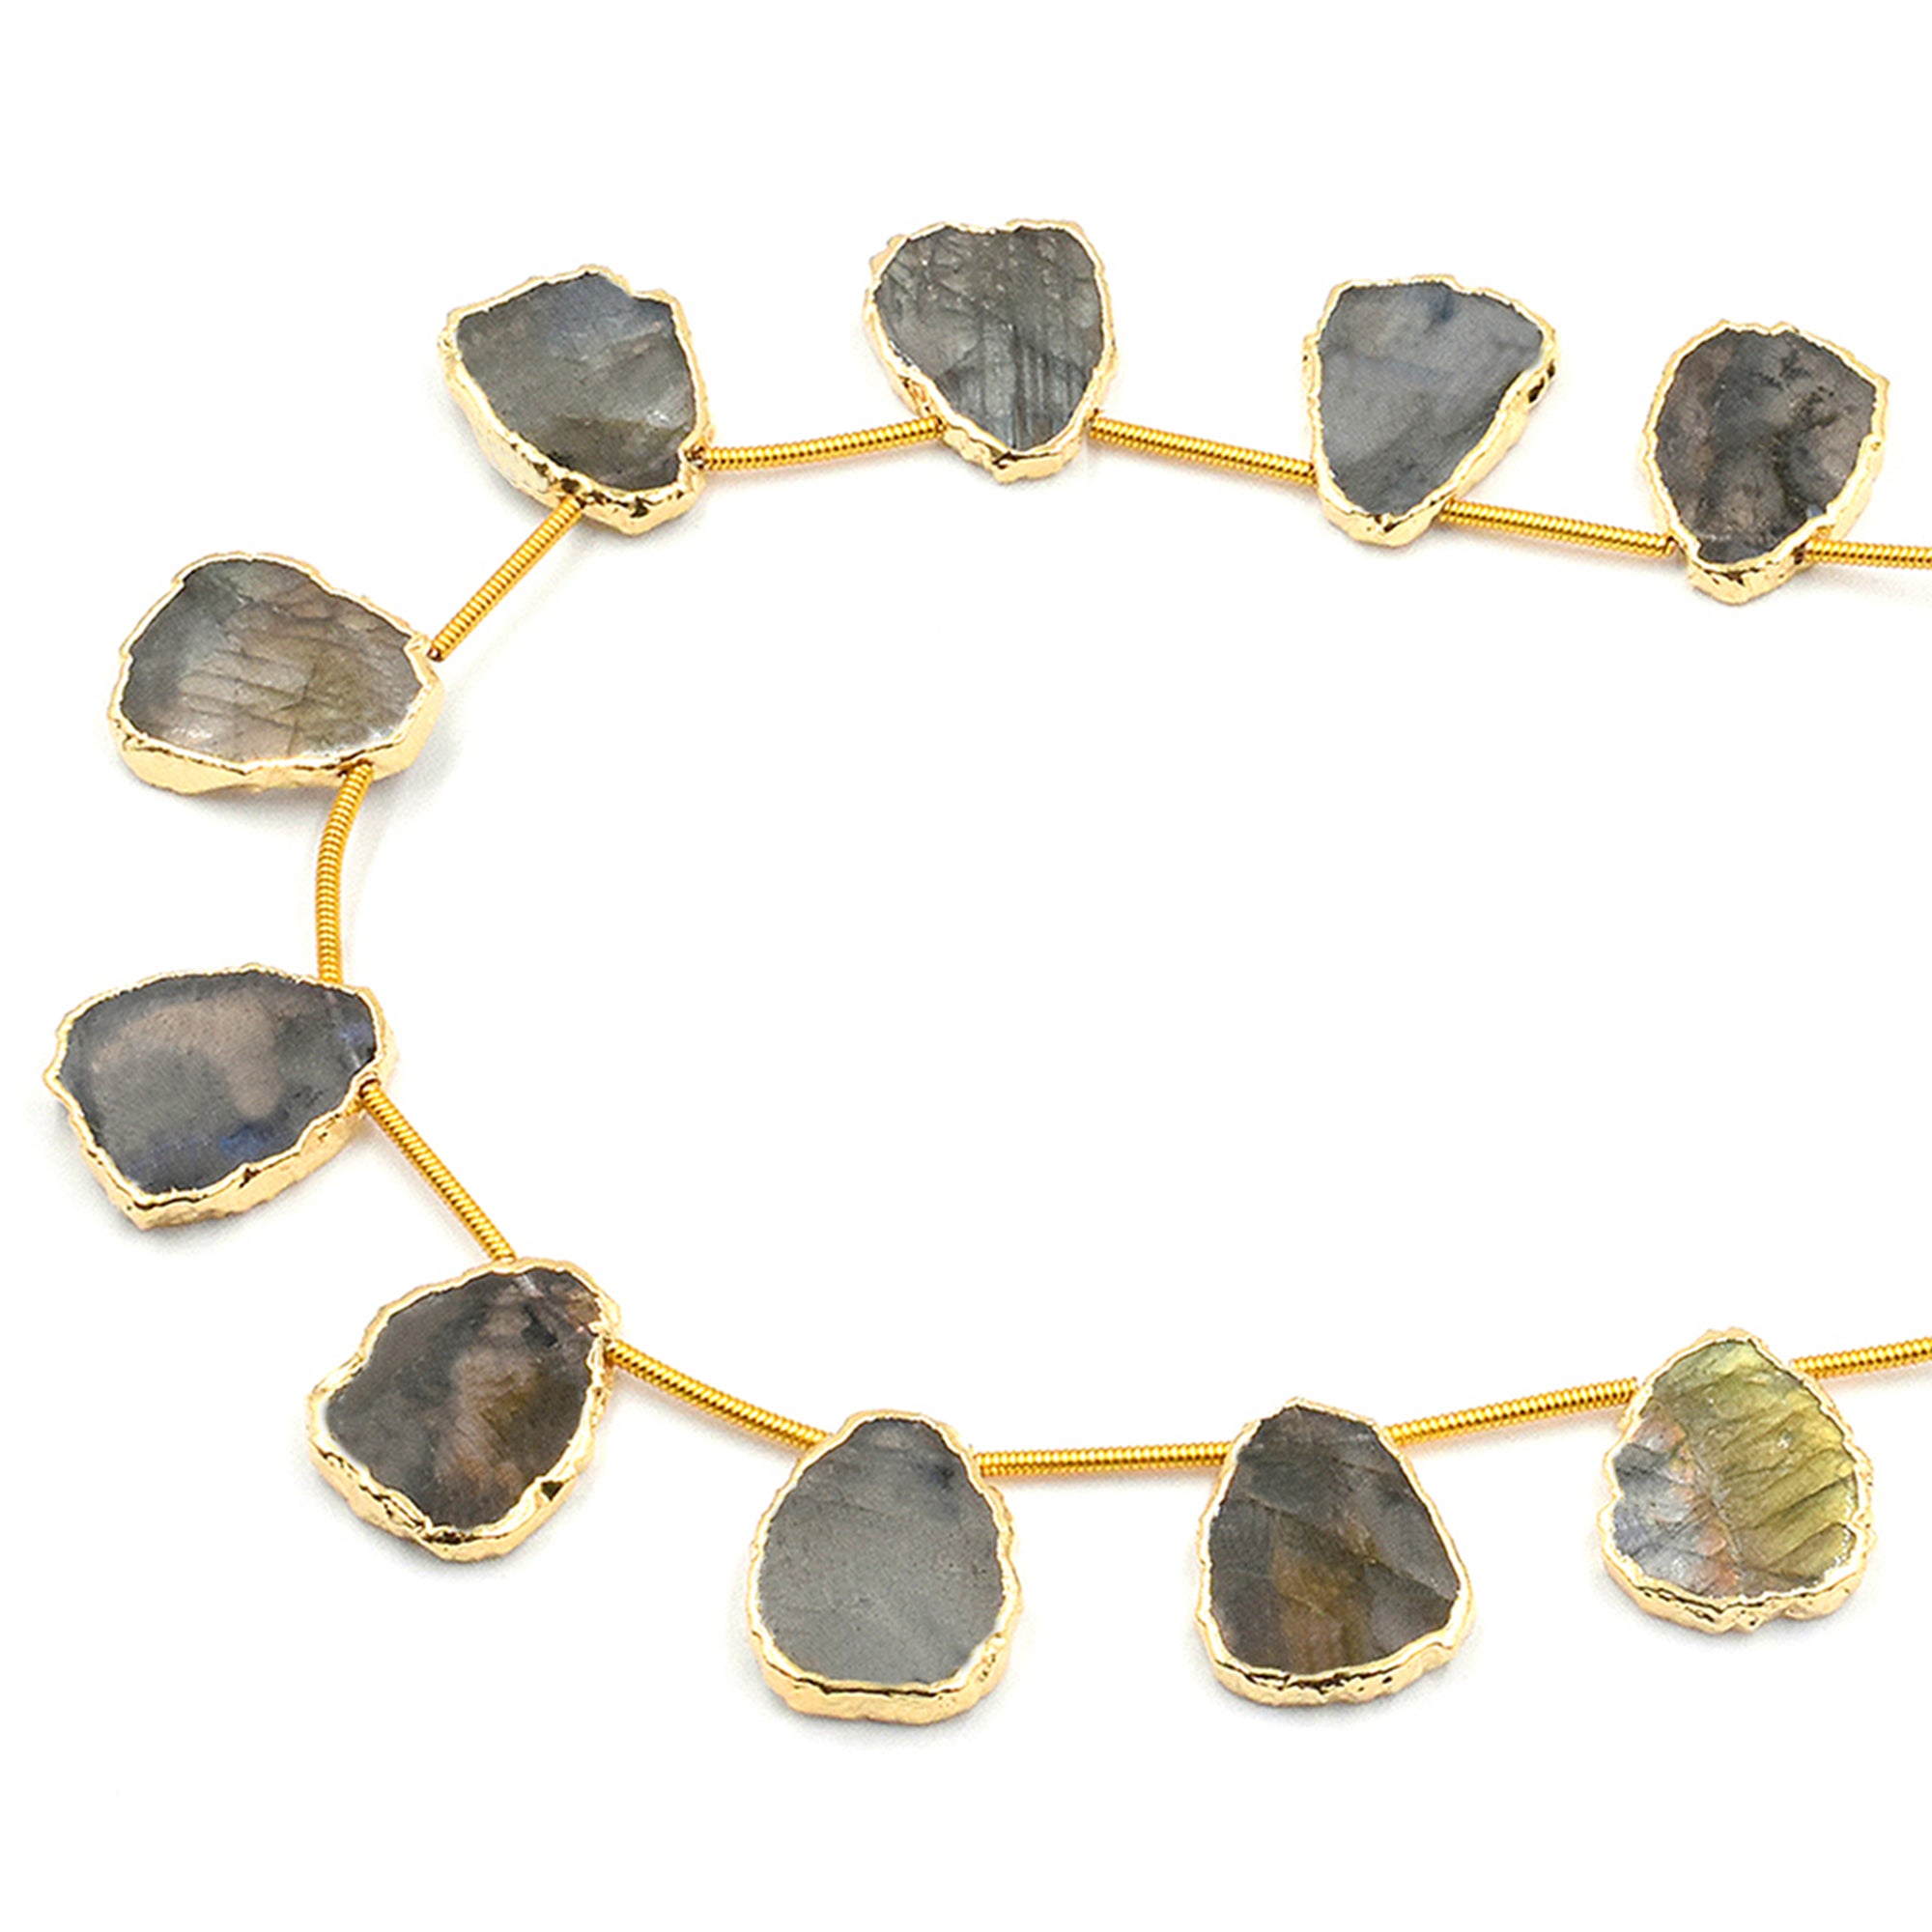 Labradorite 15X11 MM Uneven Shape Side Drilled Gold Electroplated Strand